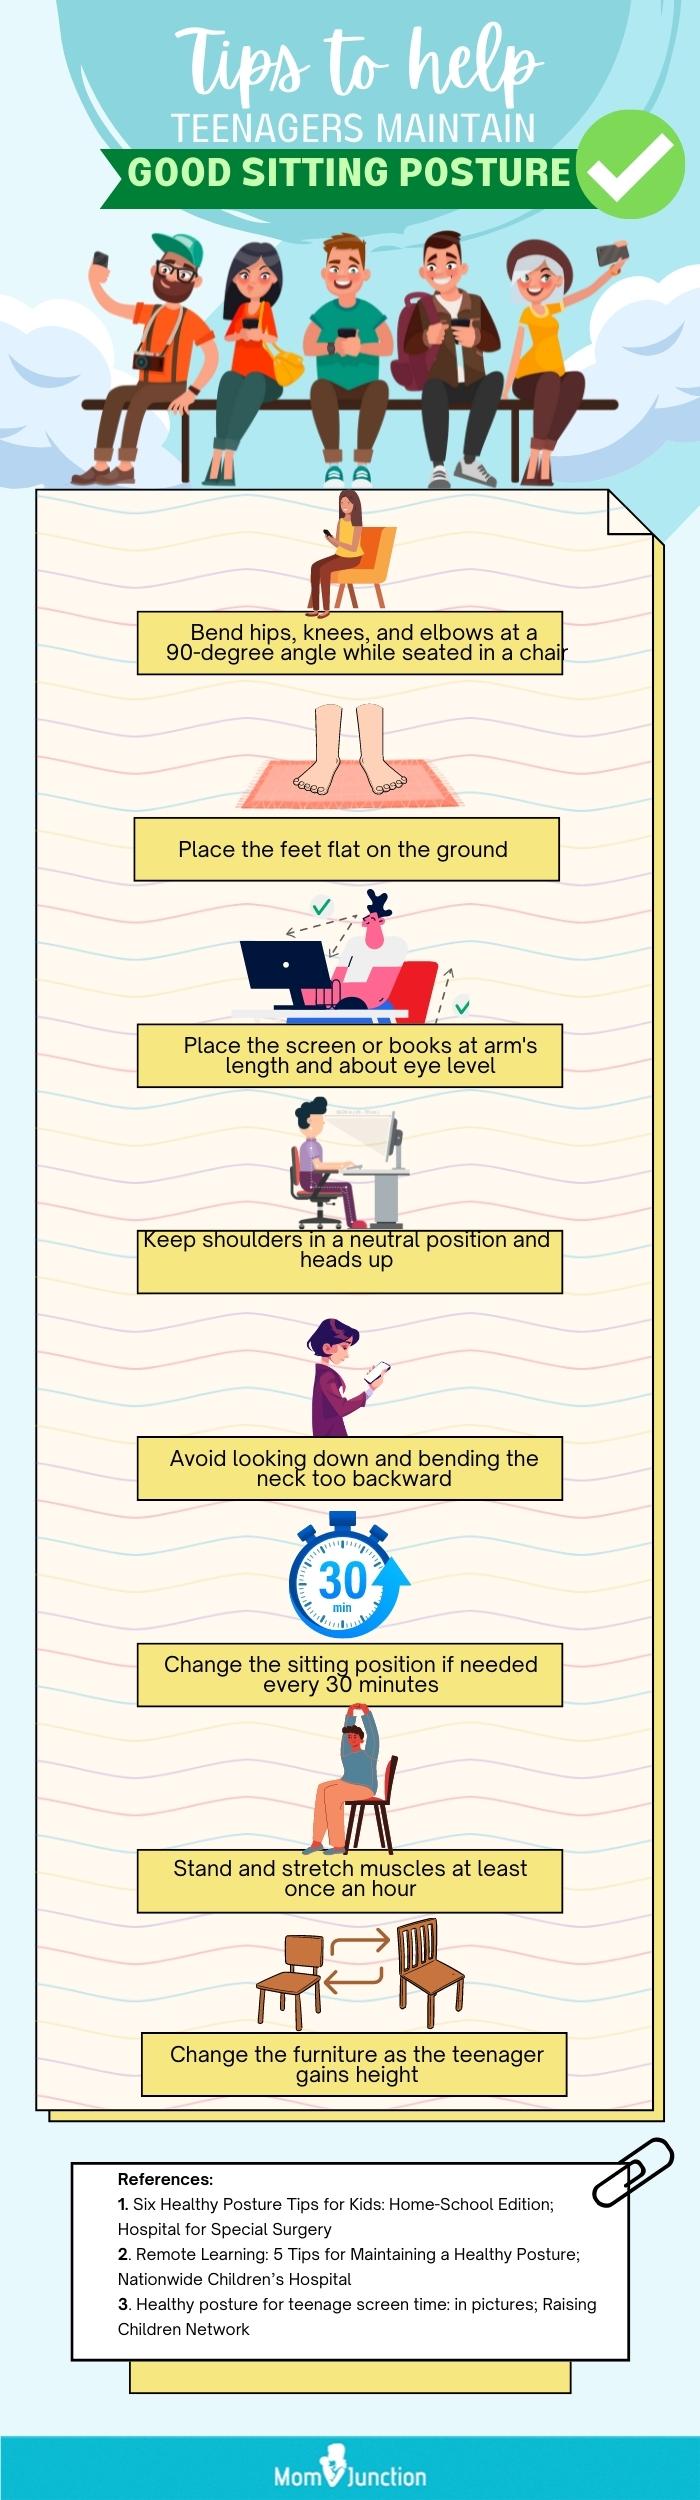 tips to help teenagers maintain good sitting posture (infographic)